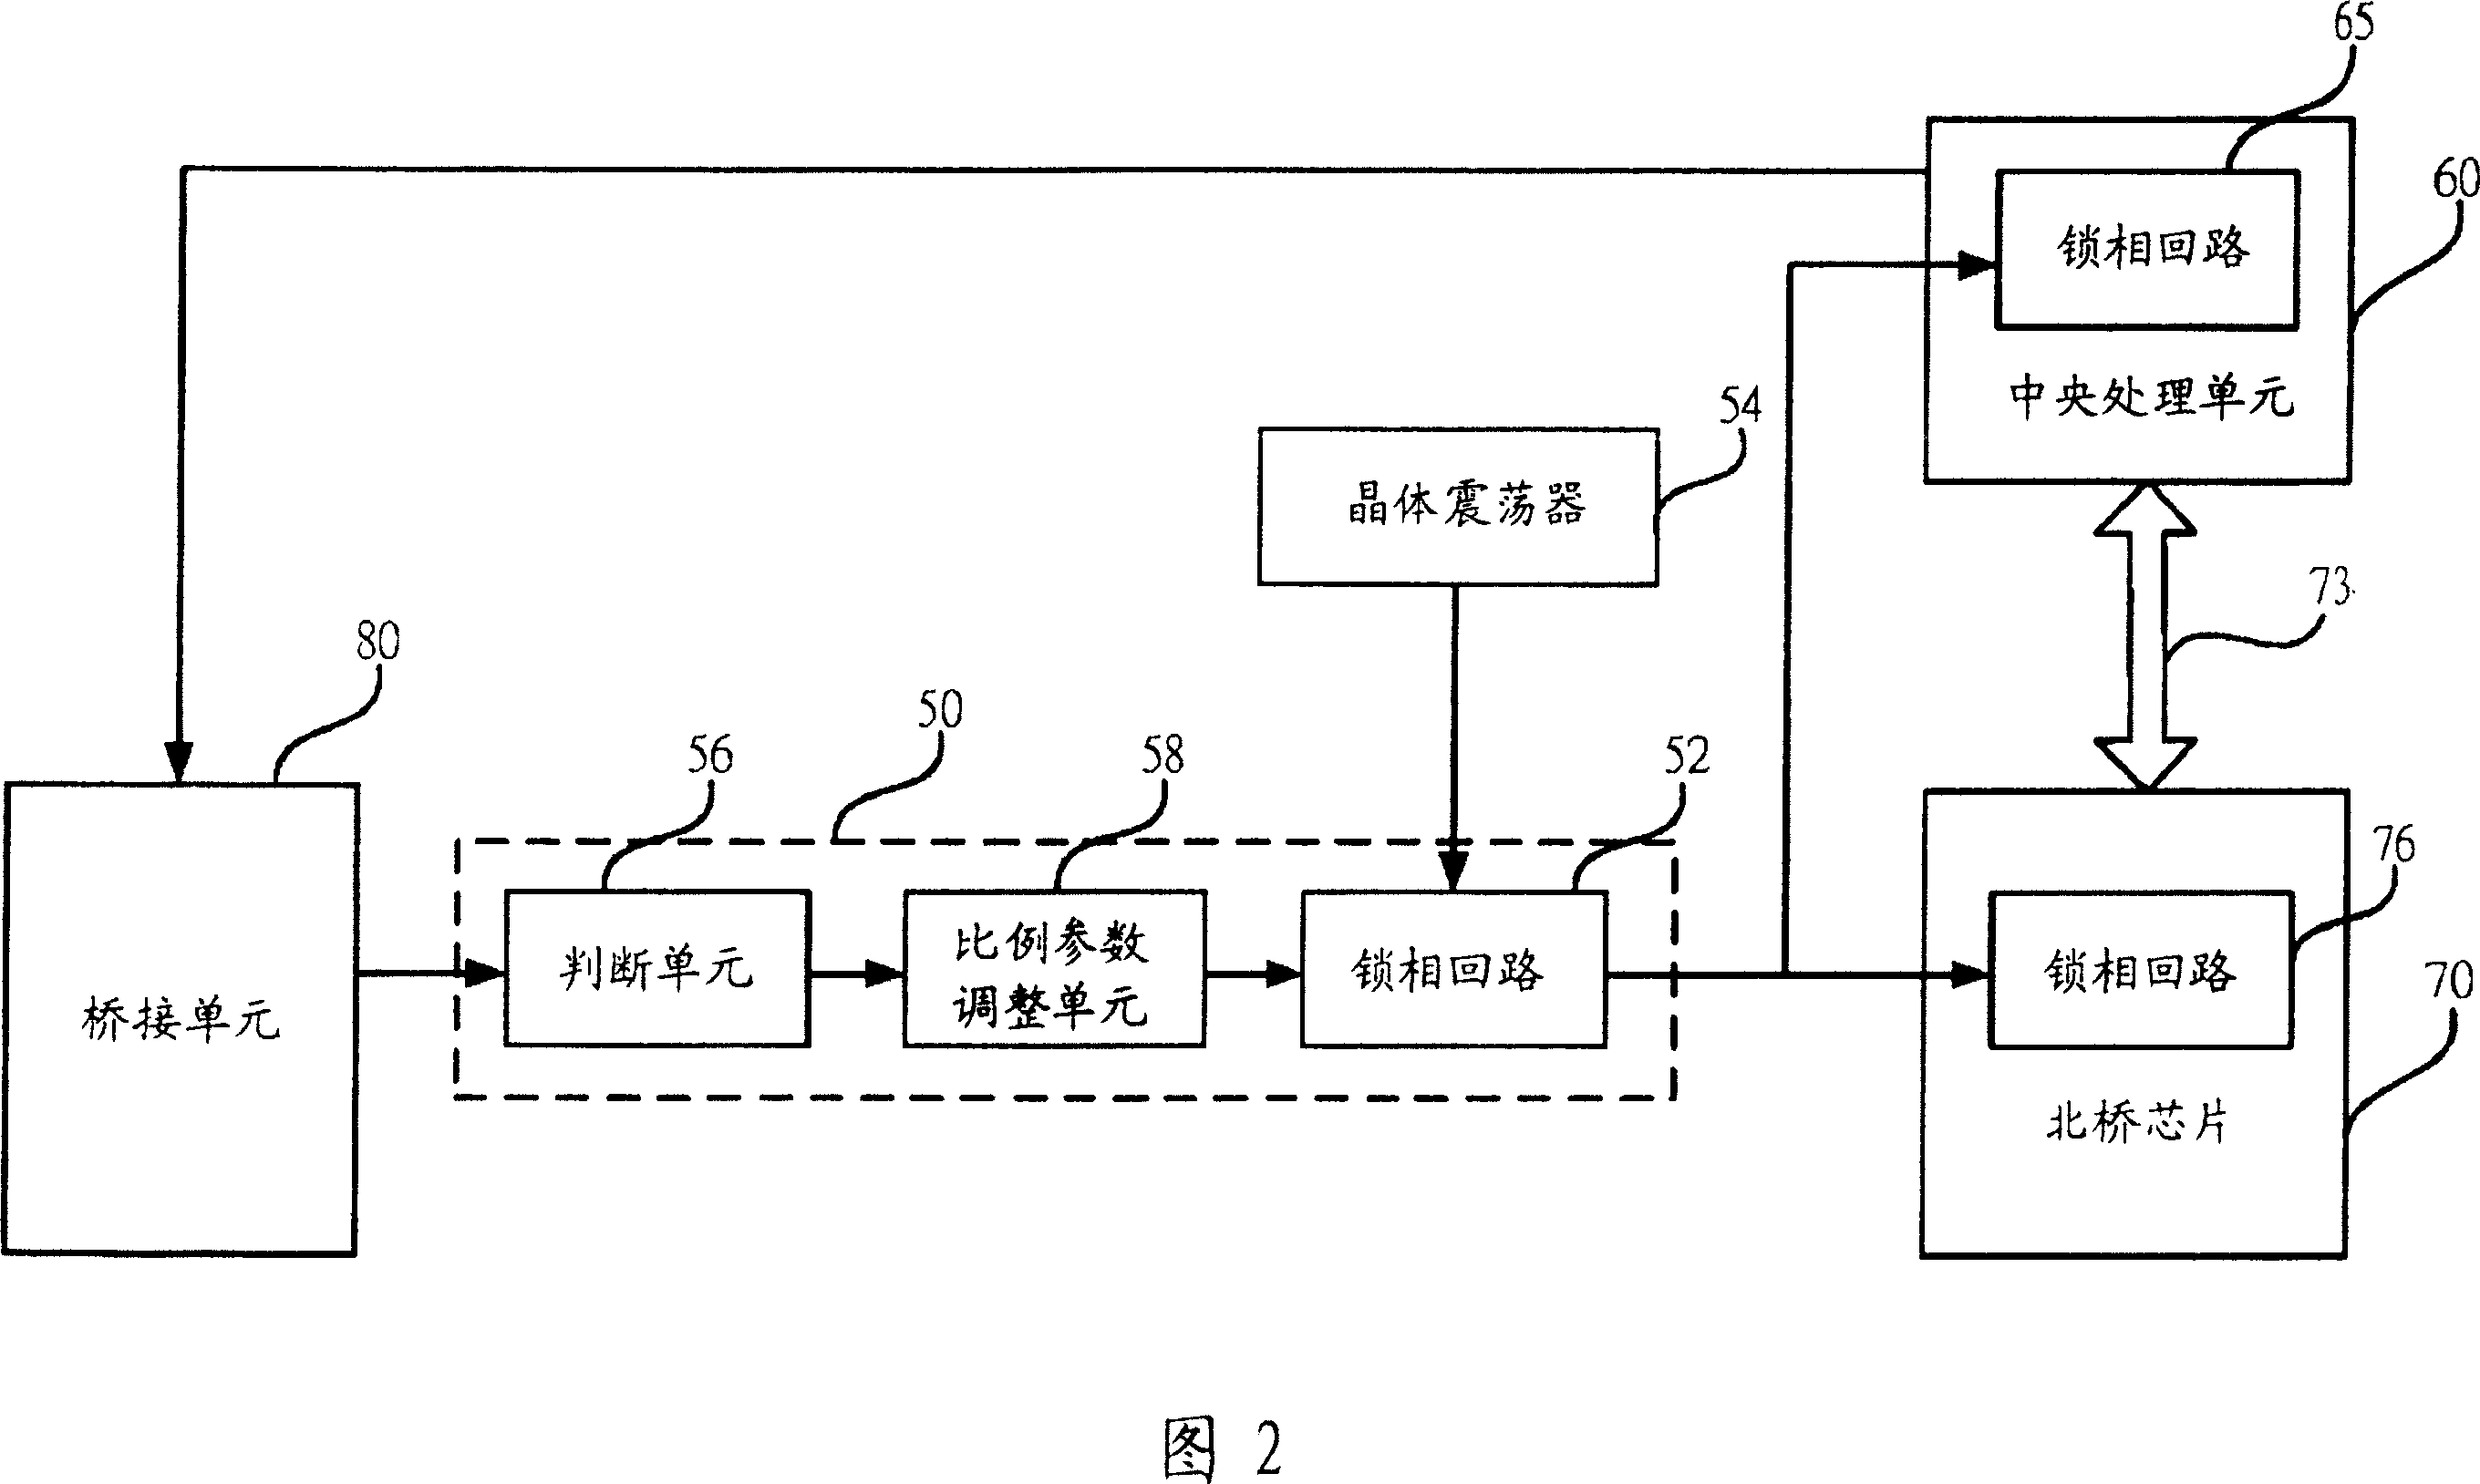 Dynamic regulating circuit and method of basic time pulse signal for front and bus bar